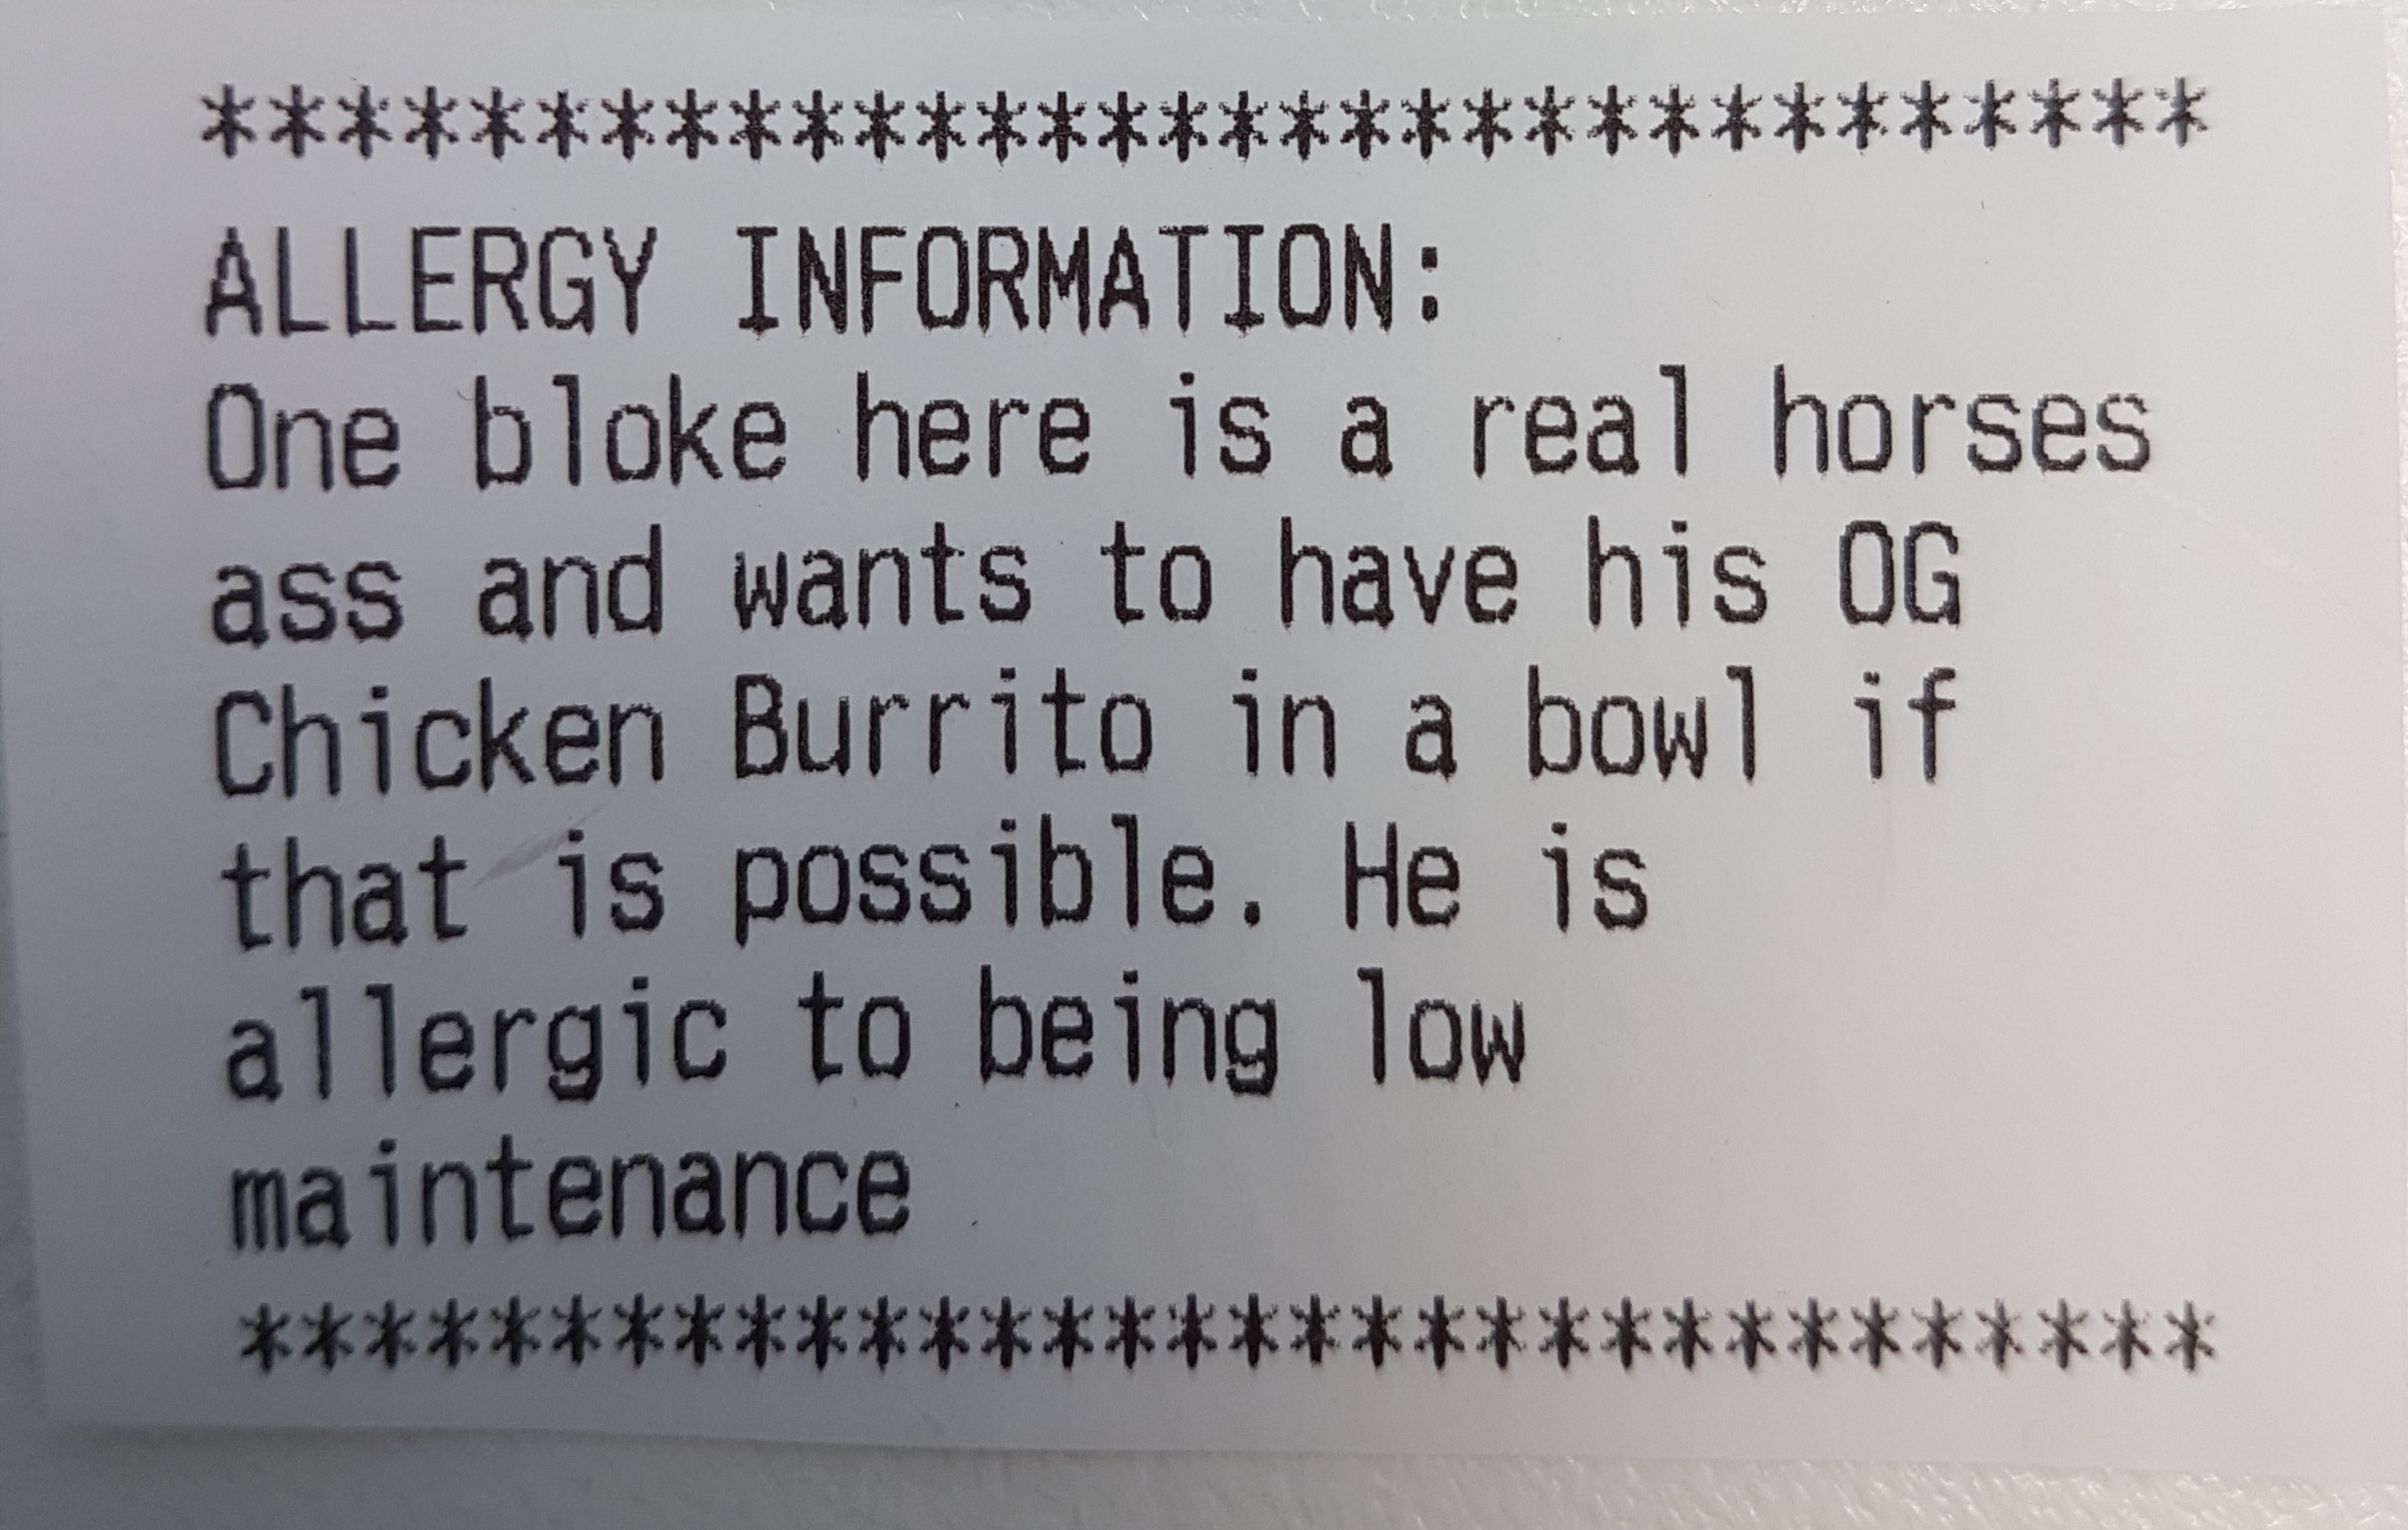 number - Allergy Information One bloke here is a real horses ass and wants to have his Og Chicken Burrito in a bowl if that is possible. He is allergic to being low maintenance